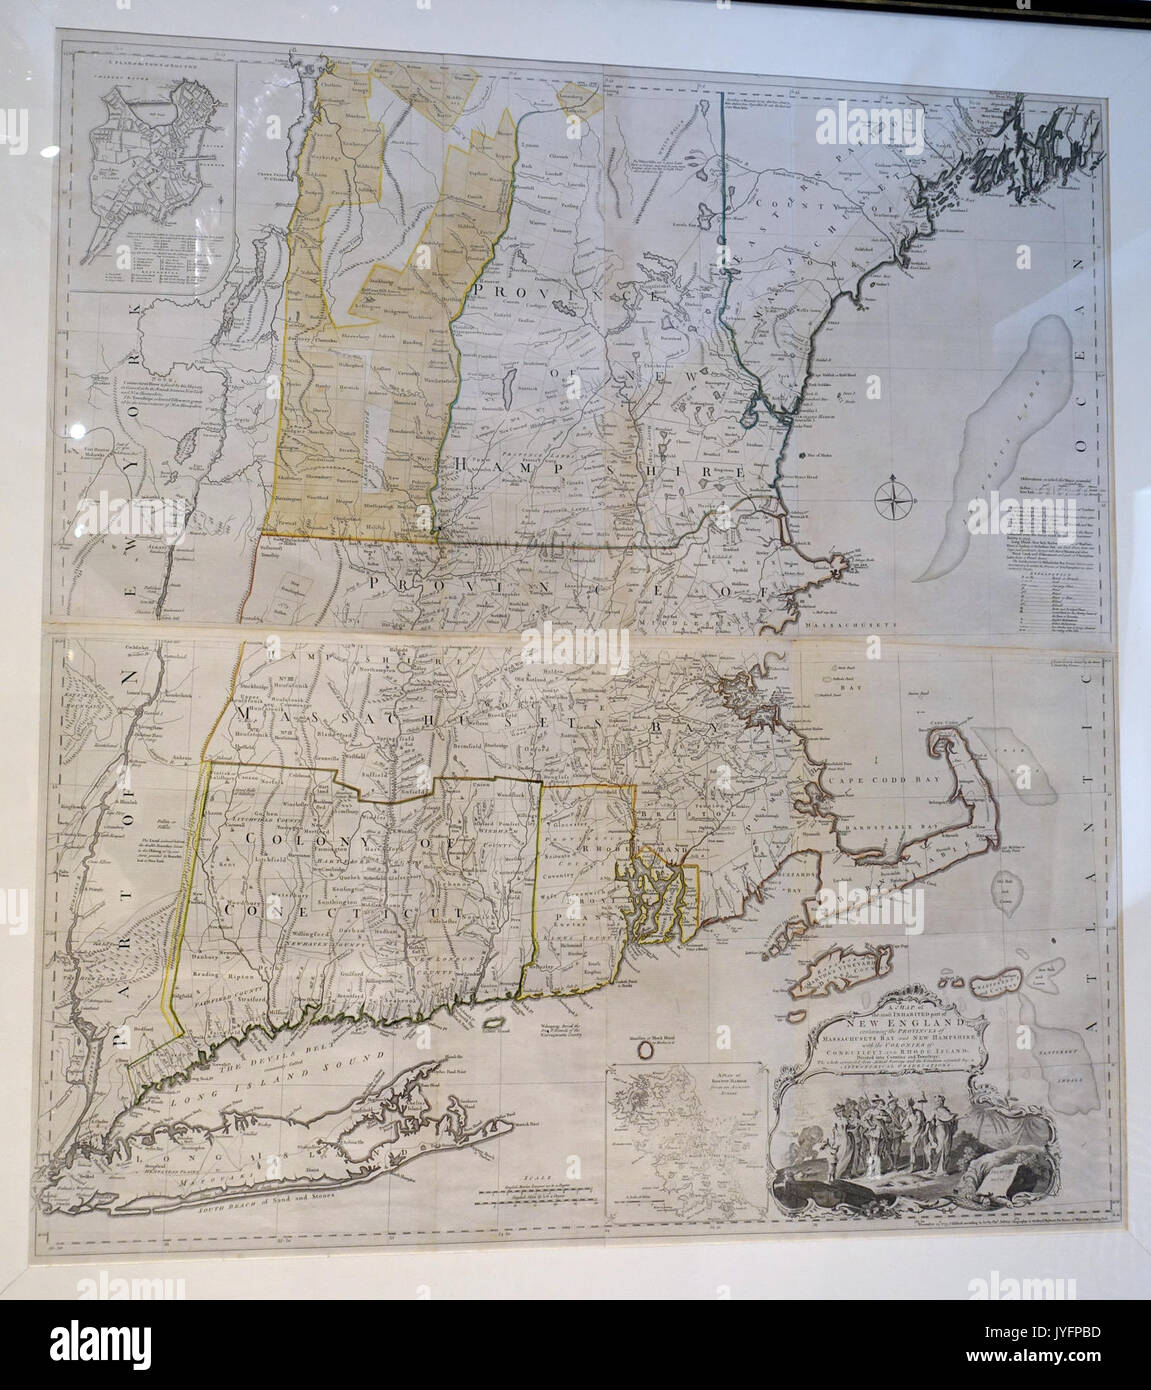 A Map of the Most Inhabited Part of New England, by Thomas Jefferys, London, England, printed by William Faden, 1774   Bennington Museum   Bennington, VT   DSC08732 Stock Photo